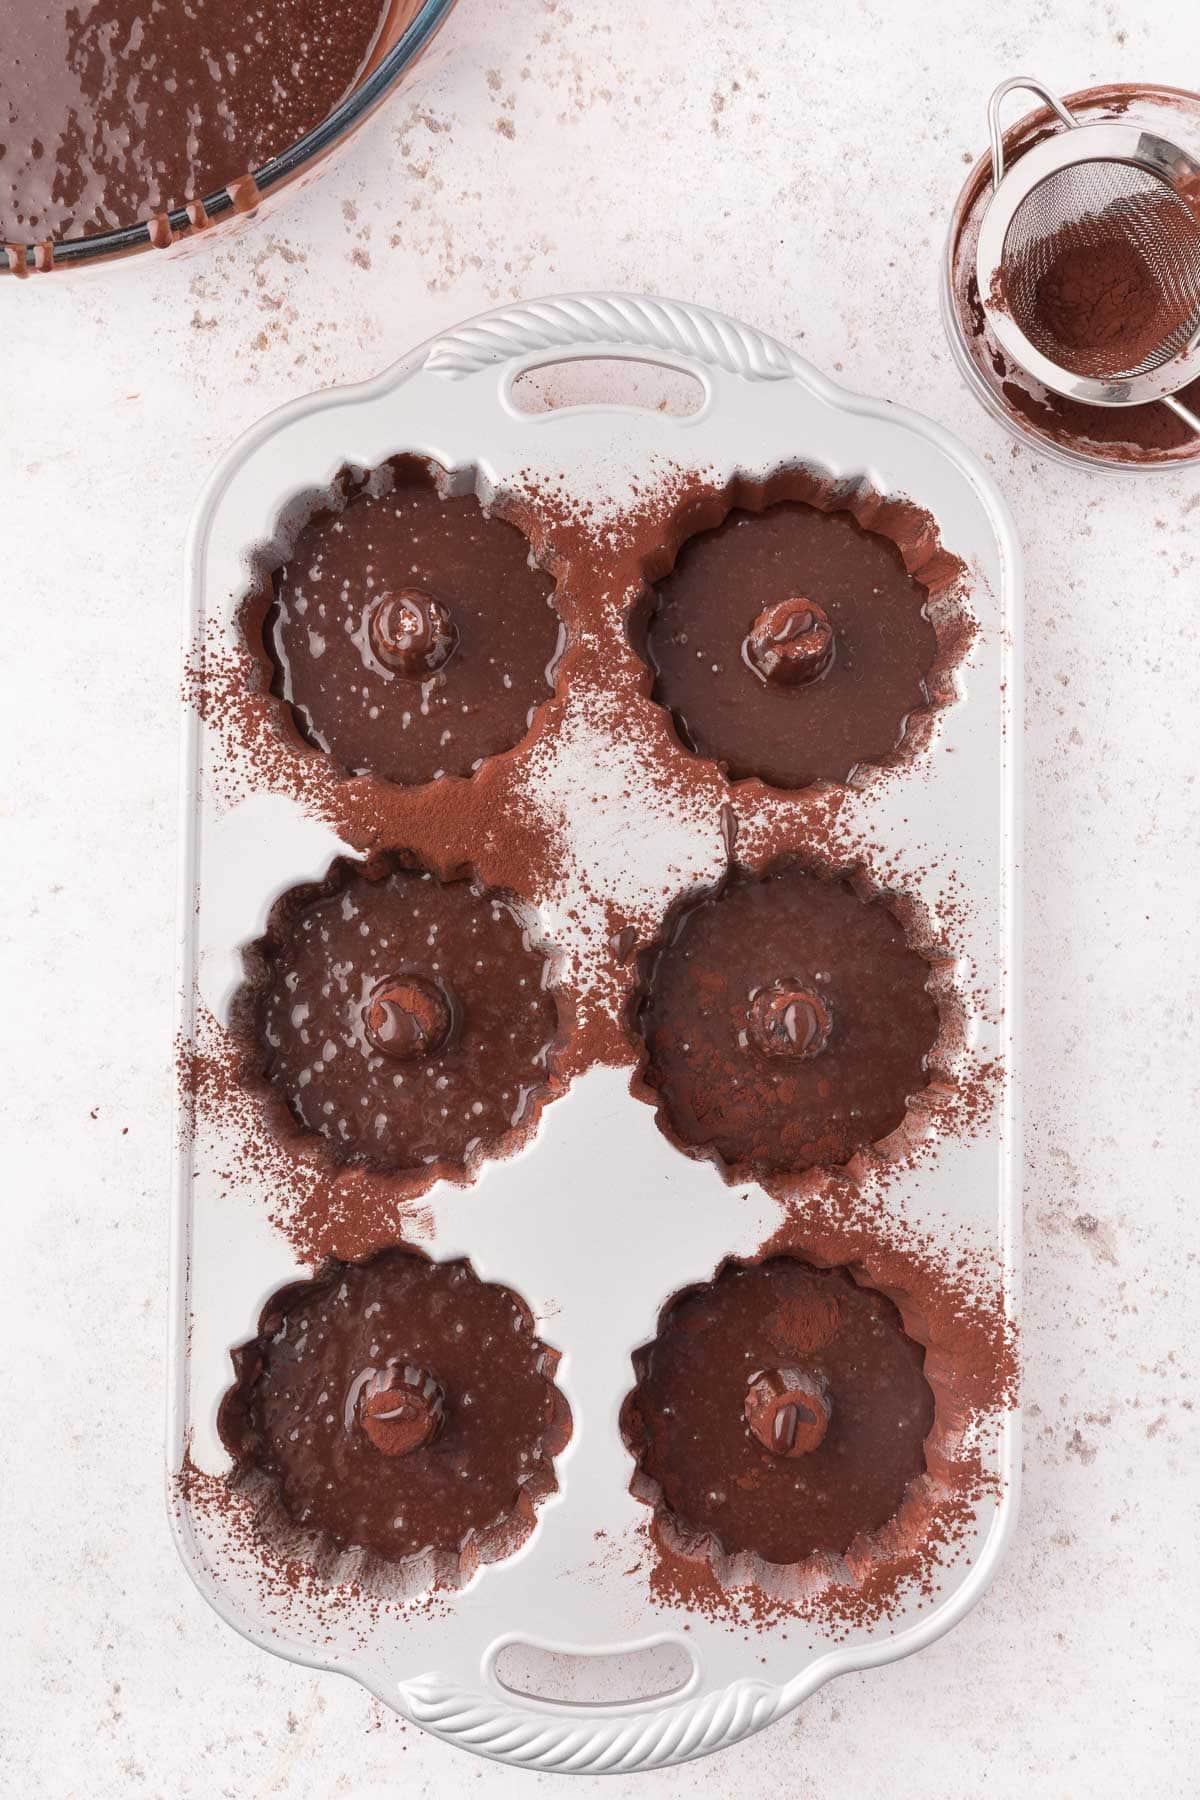 mini bundt pans are filled with chocolate batter